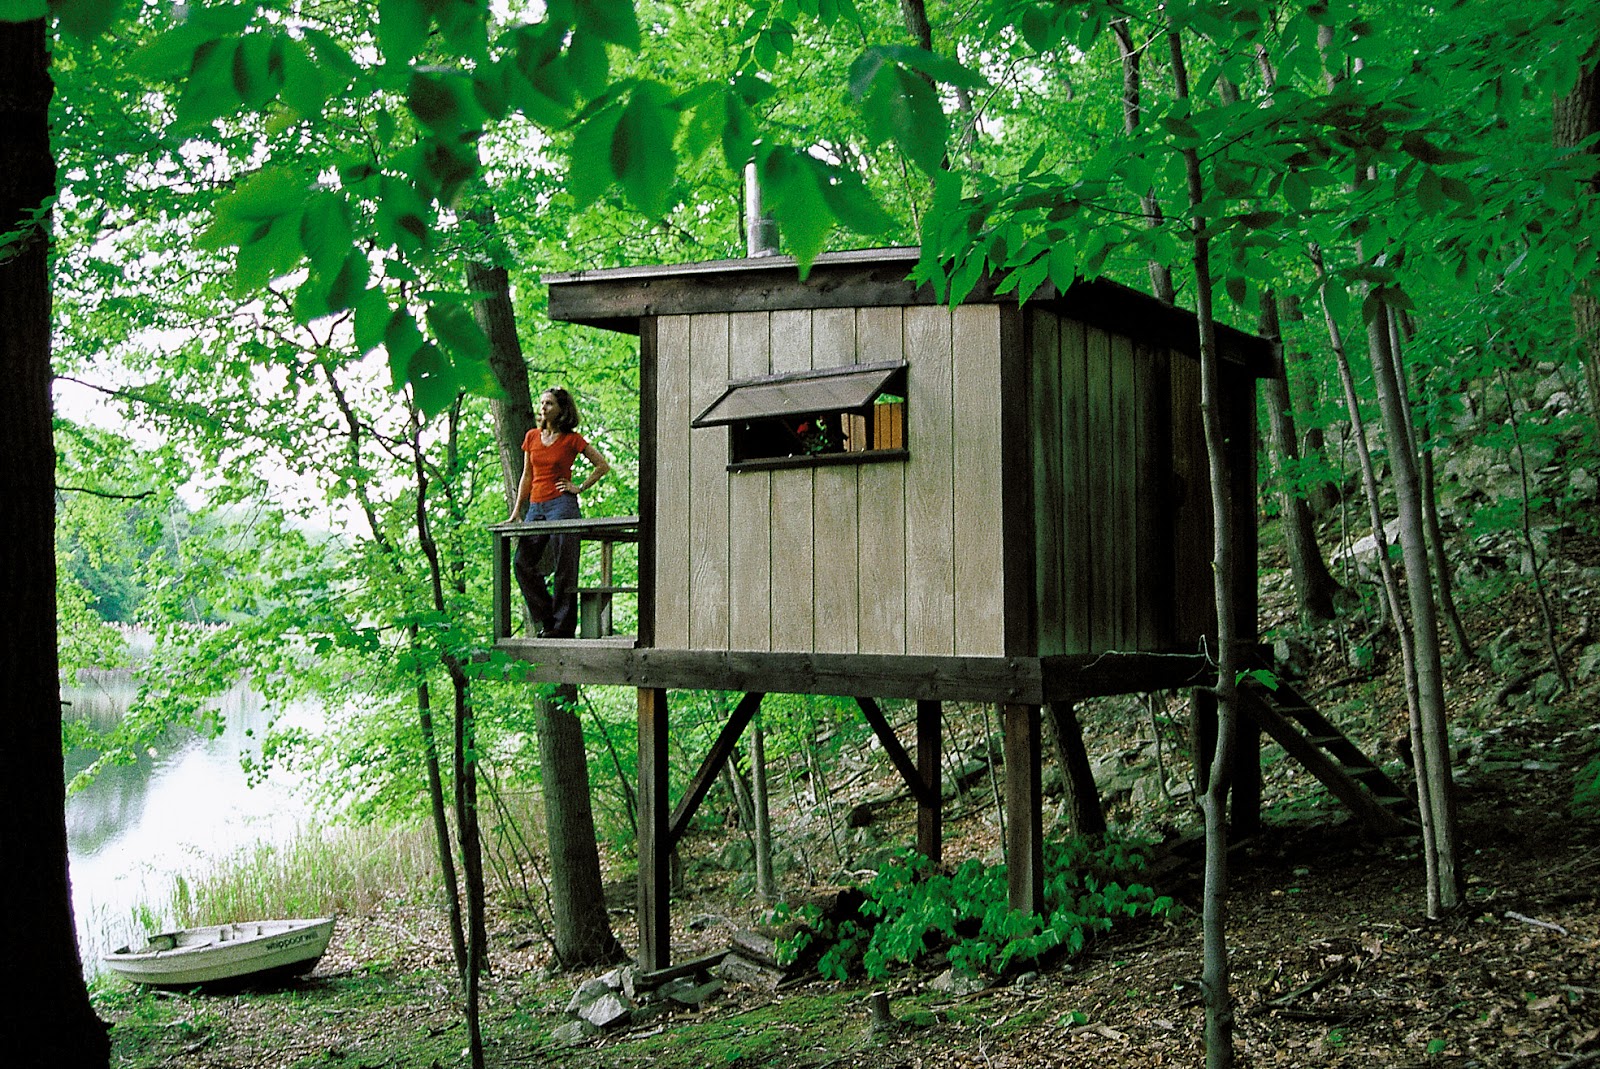 Relaxshacks.com: Ten super-cool tiny houses, shelters, treehouses, and 